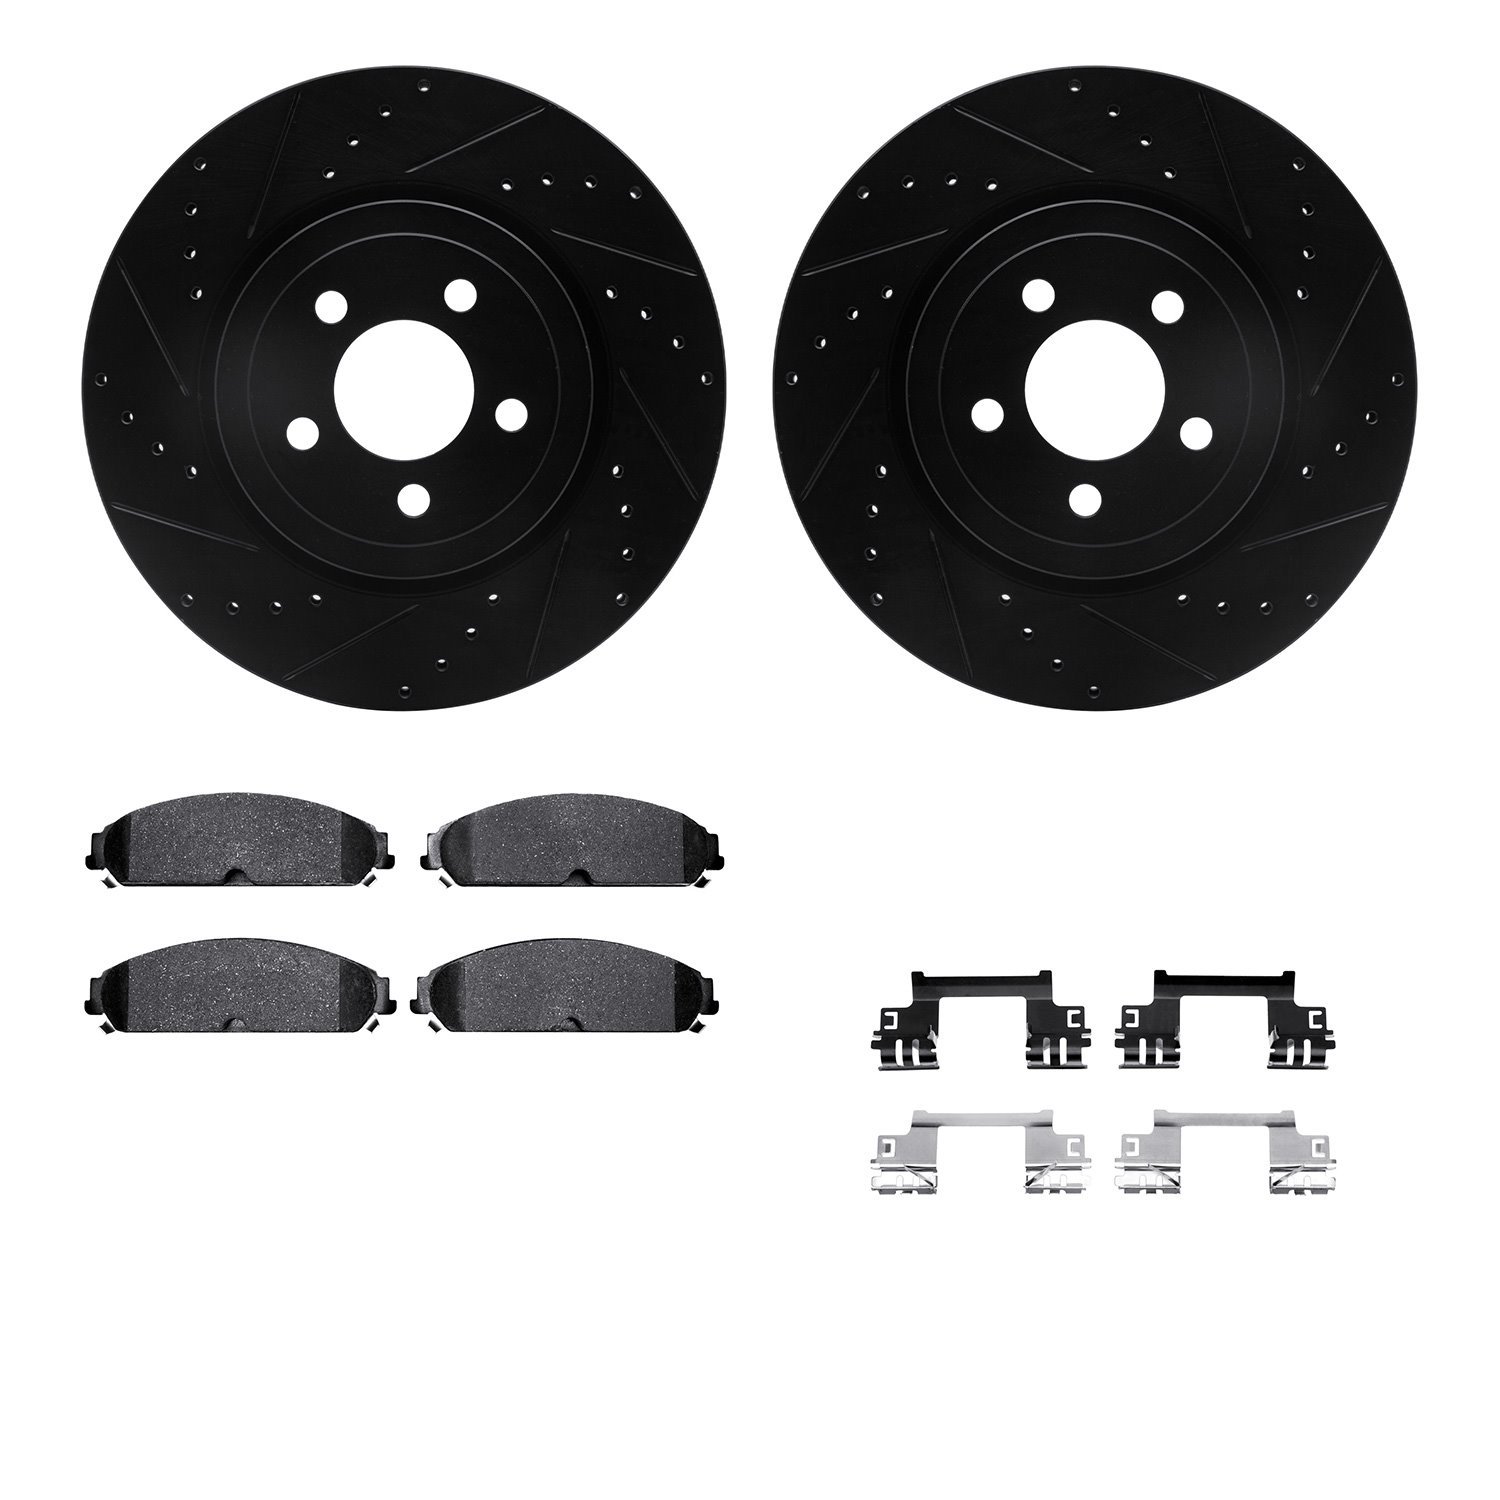 8212-39033 Drilled/Slotted Rotors w/Heavy-Duty Brake Pads Kit & Hardware [Black], Fits Select Mopar, Position: Front